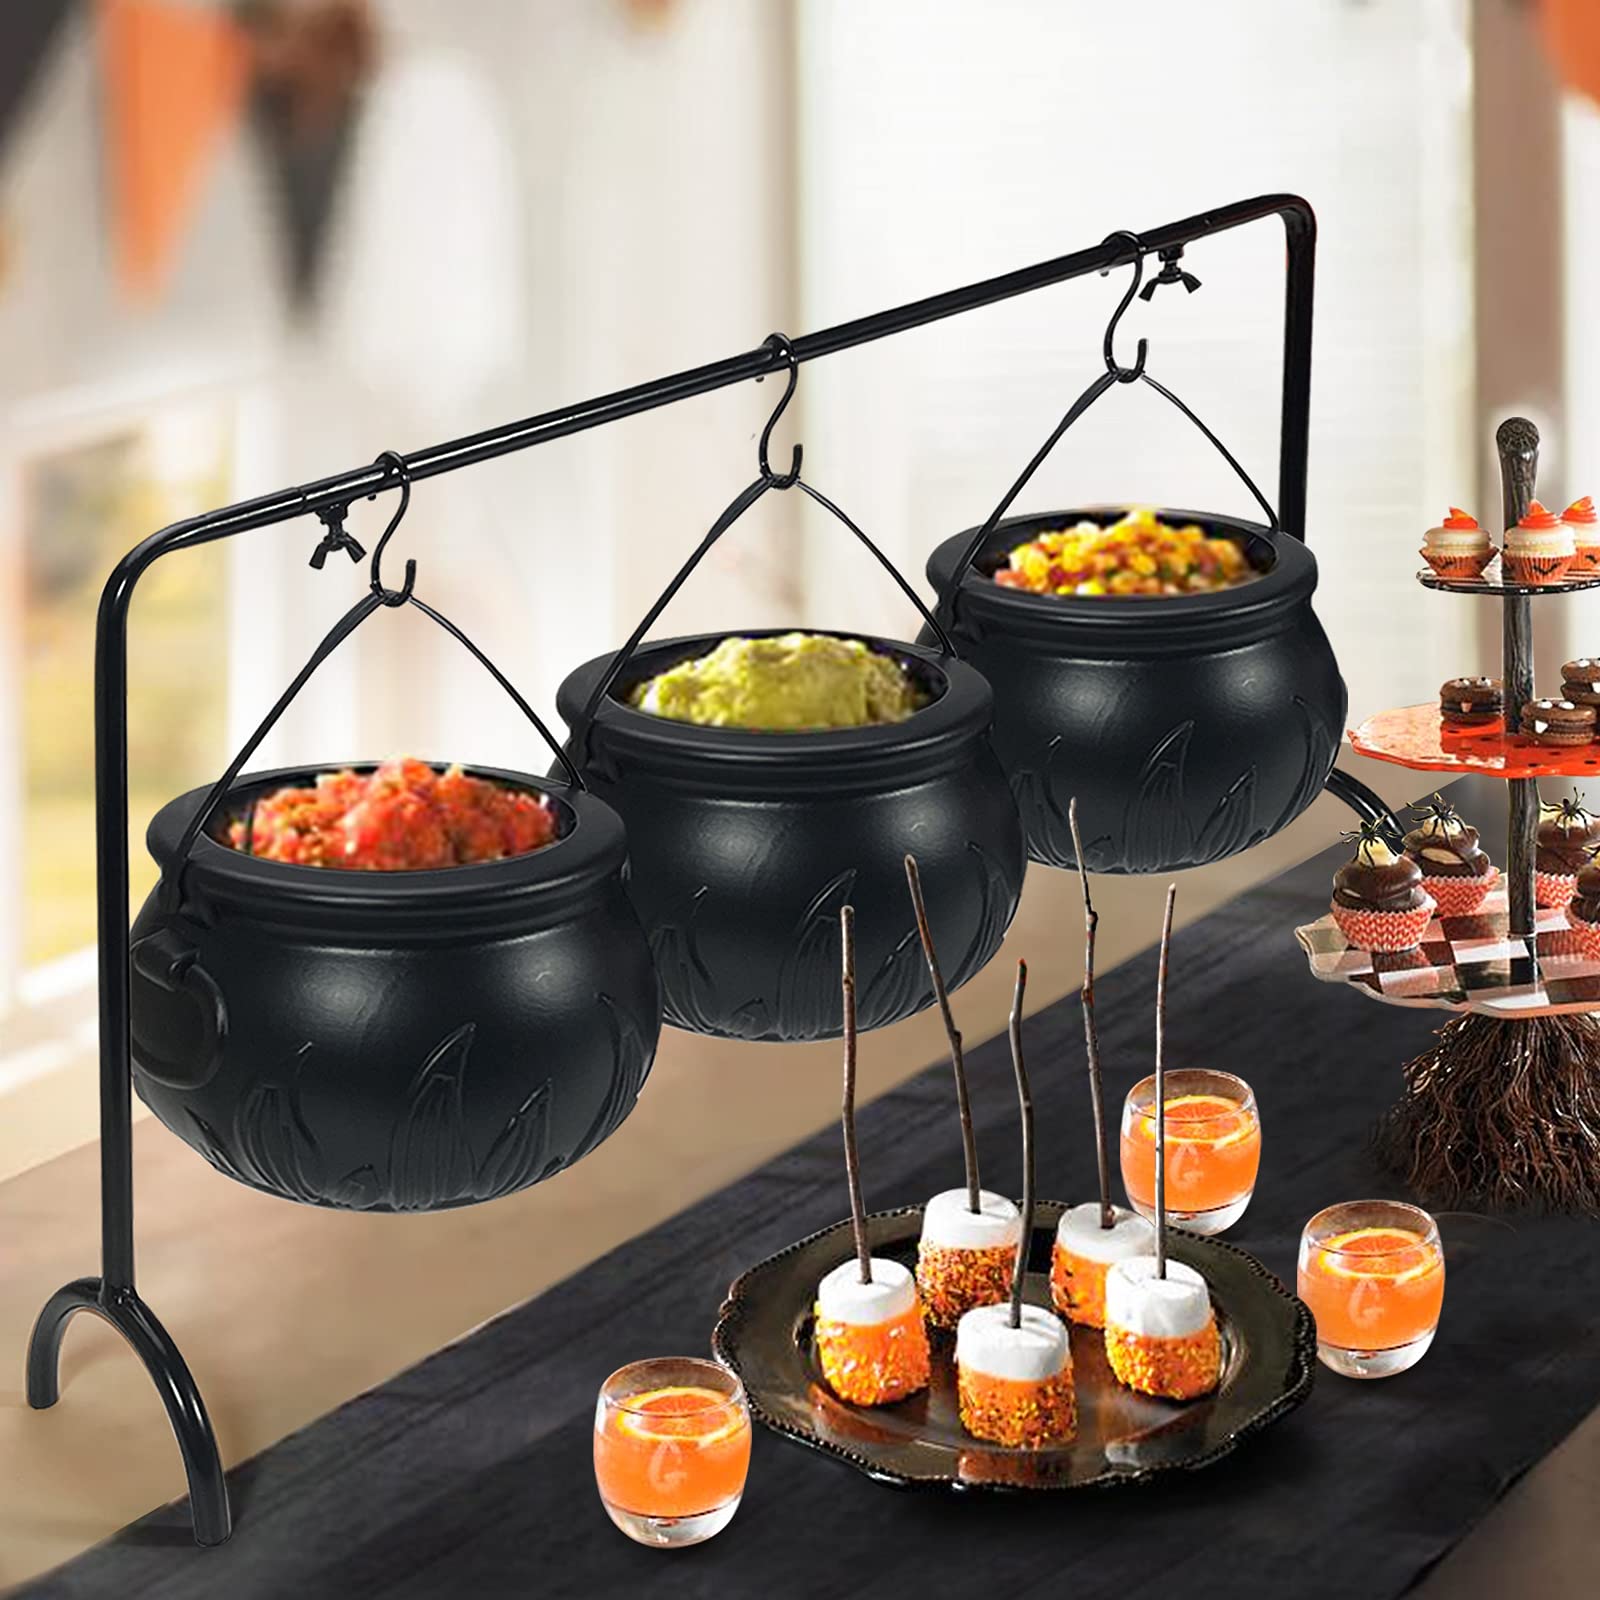 Set of 3 Witches Cauldron Serving Bowls on Rack